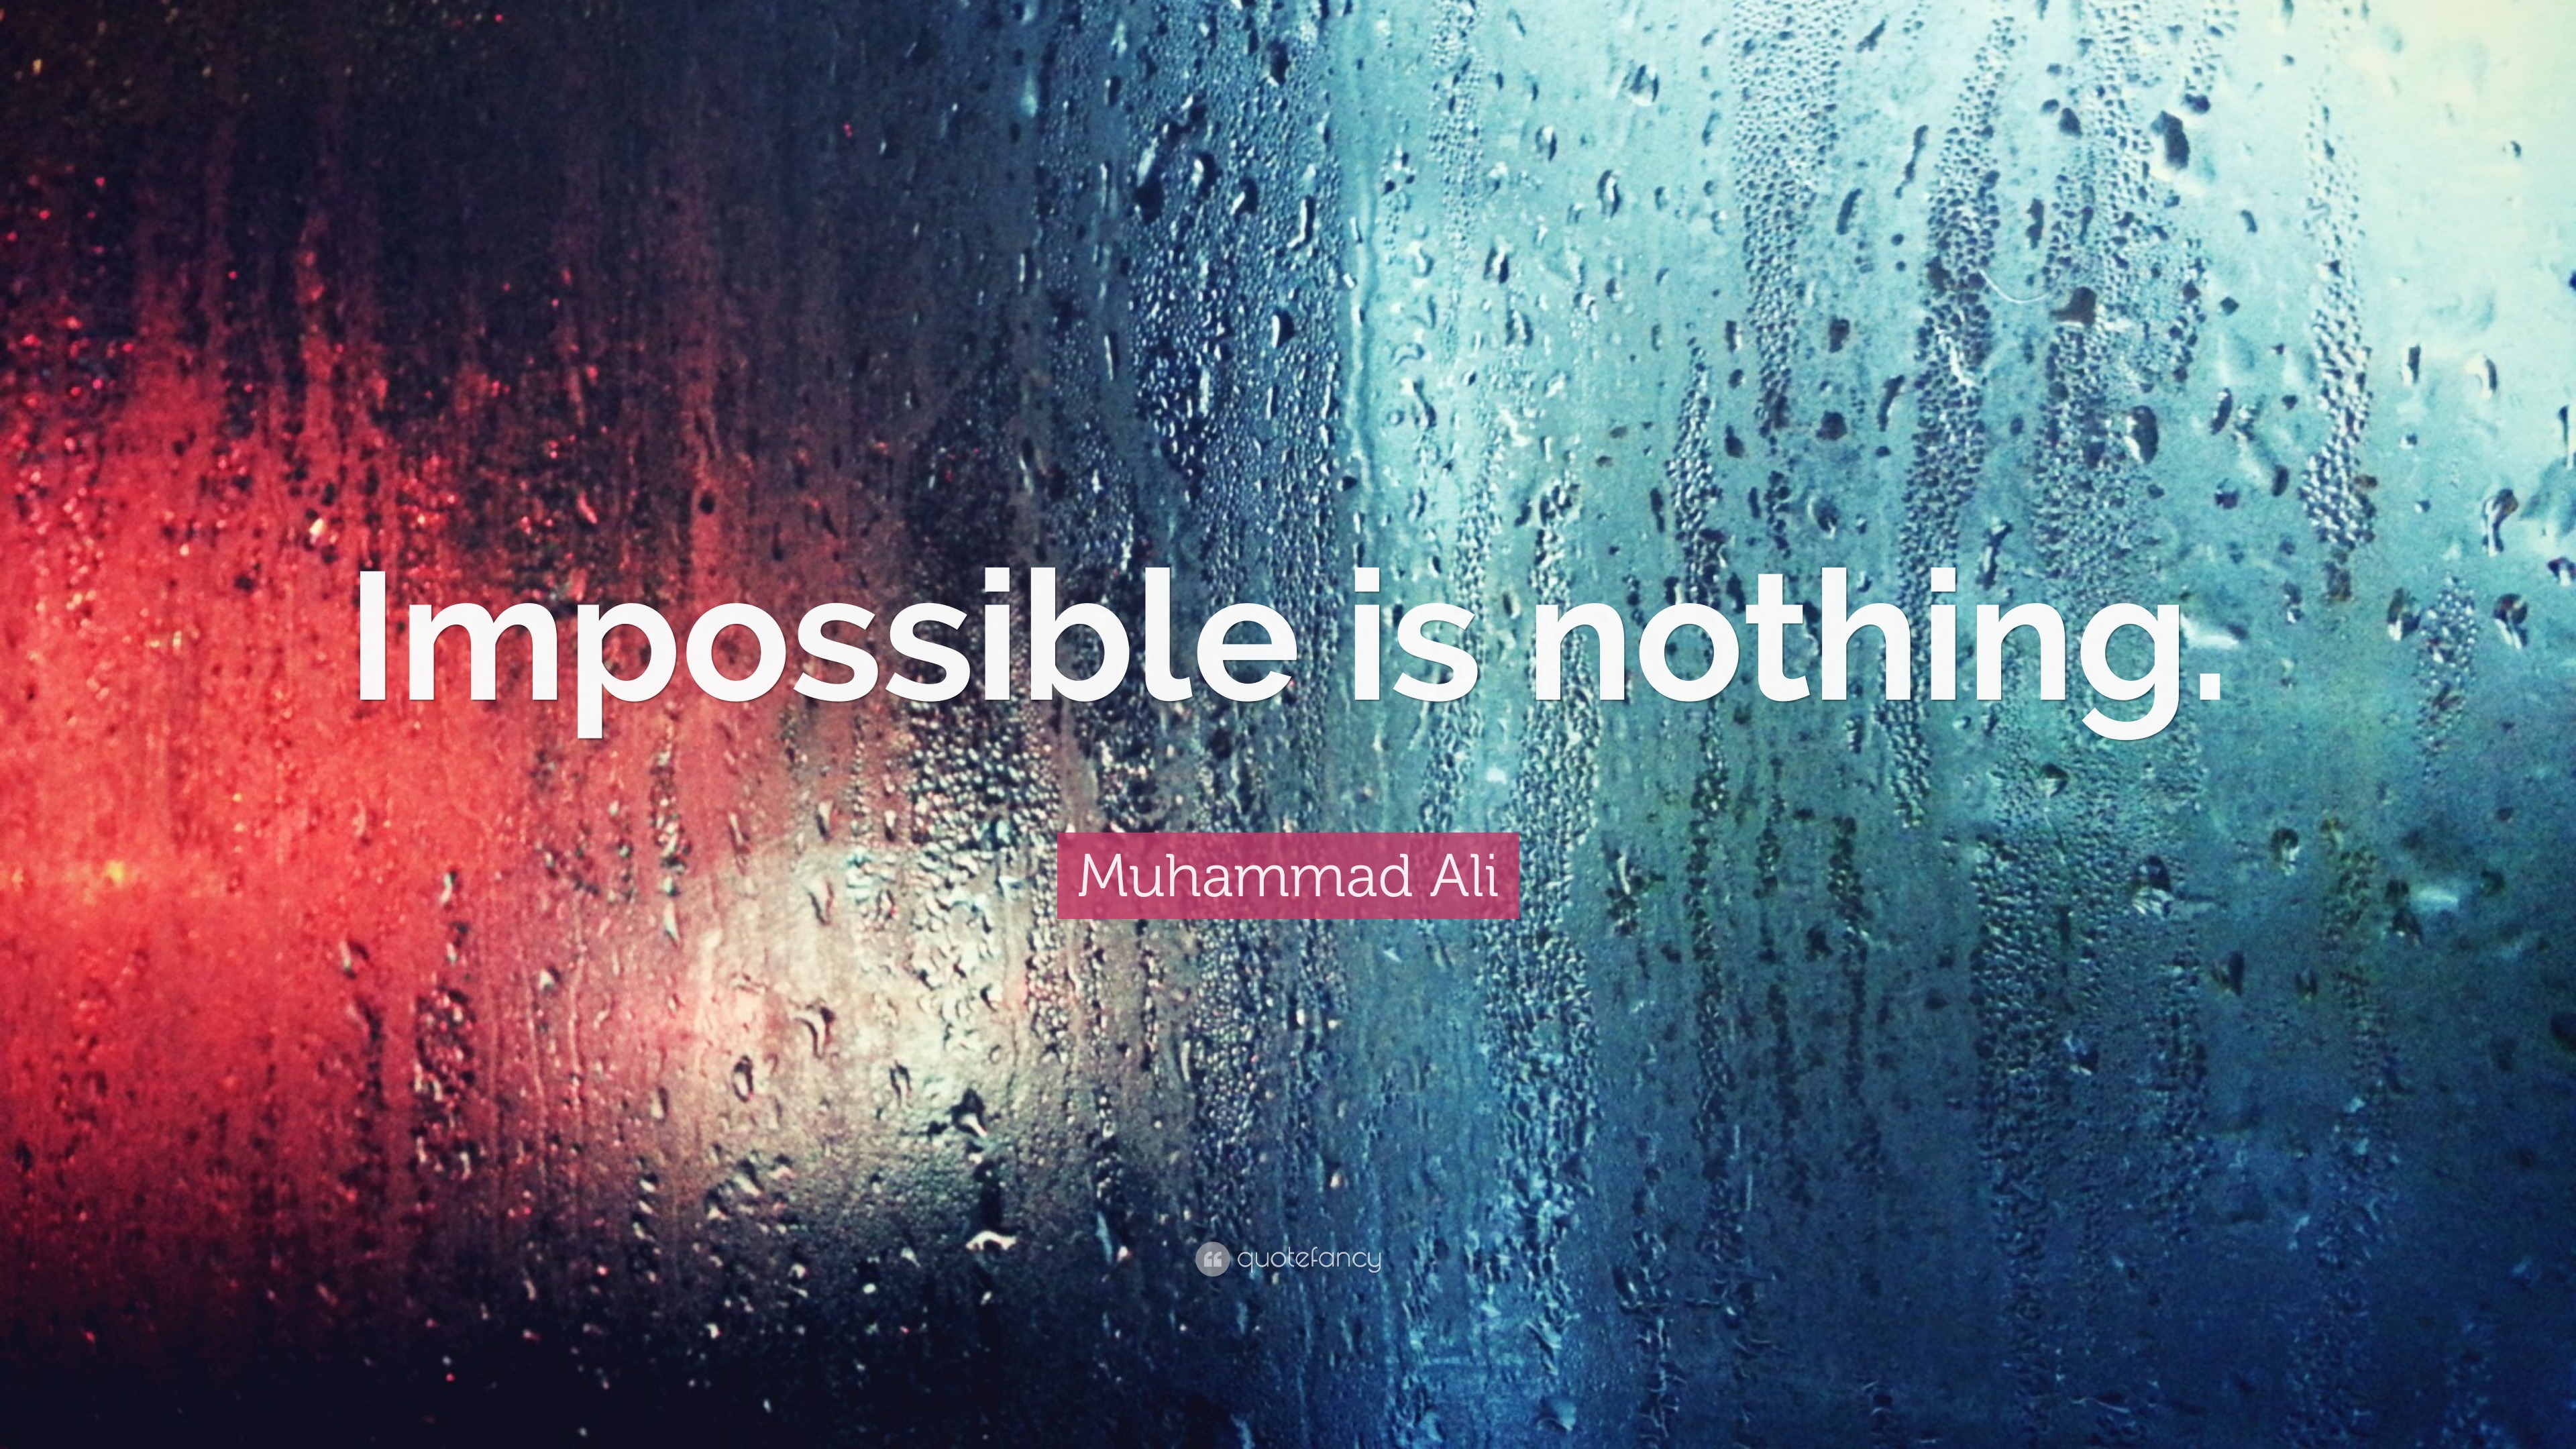 Muhammad Ali Quote Impossible is nothing